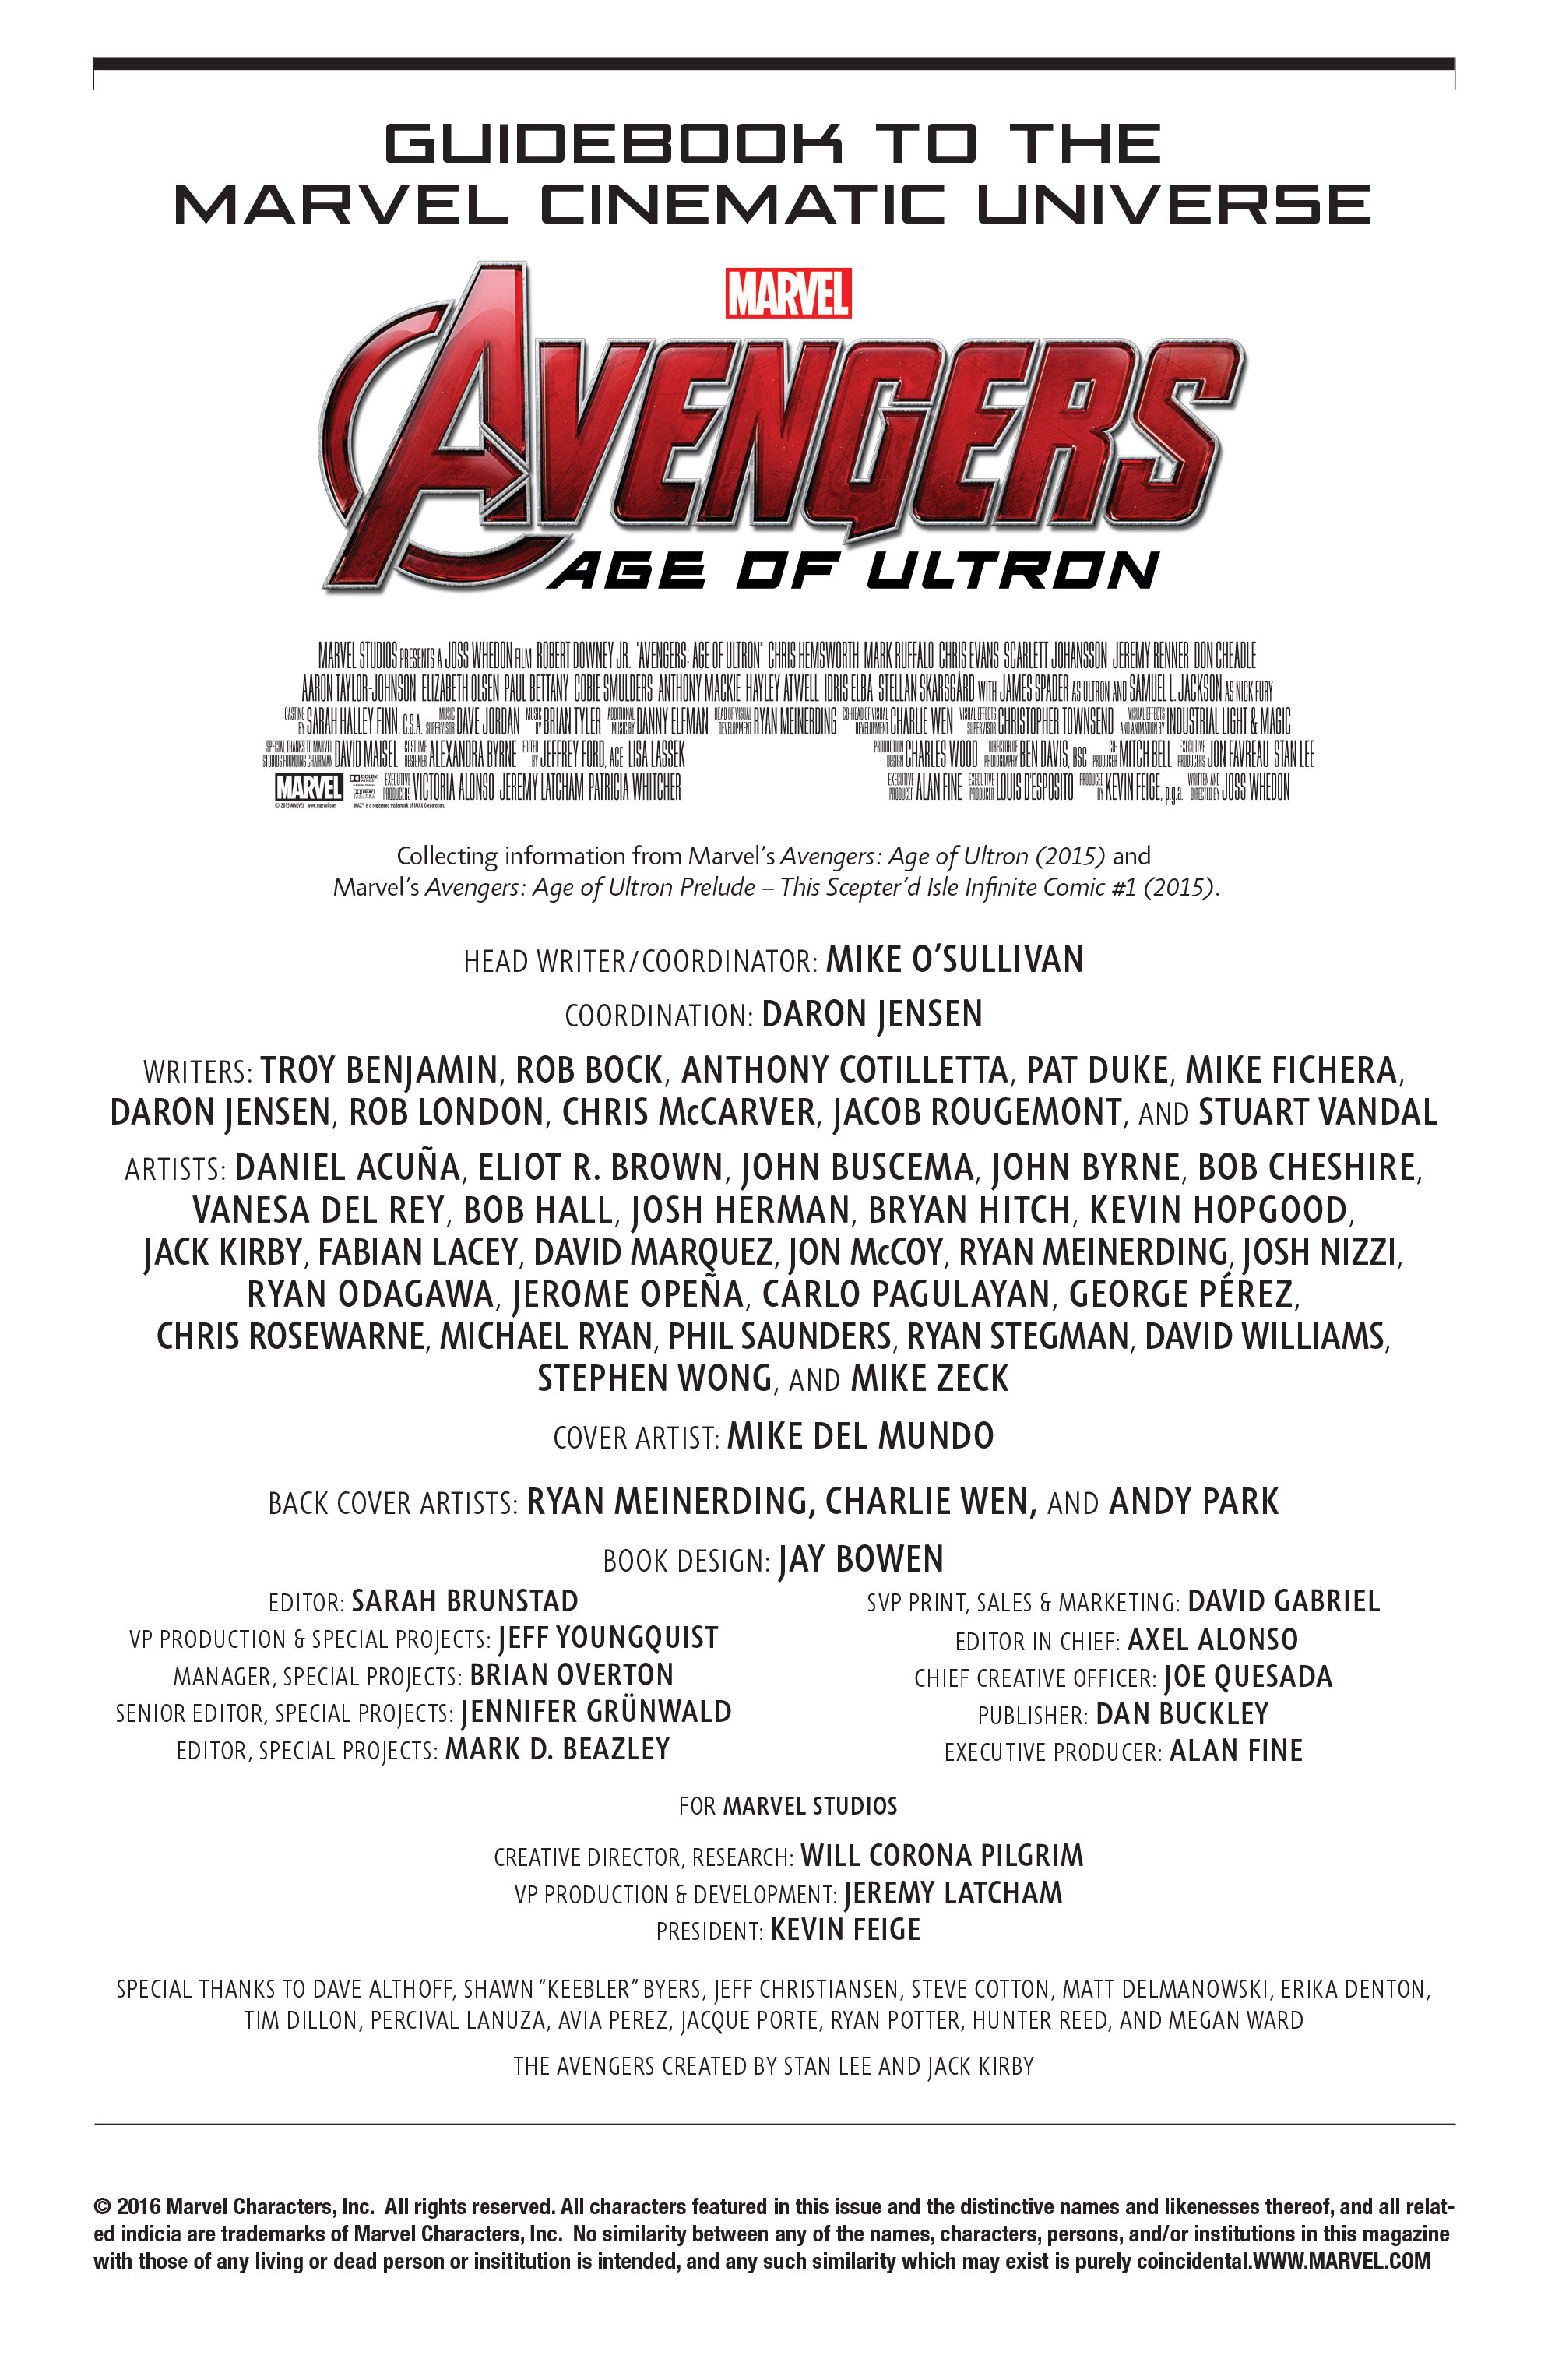 Read online Guidebook To the Marvel Cinematic Universe – Marvel's Avengers: Age of Ultron comic -  Issue # Full - 2